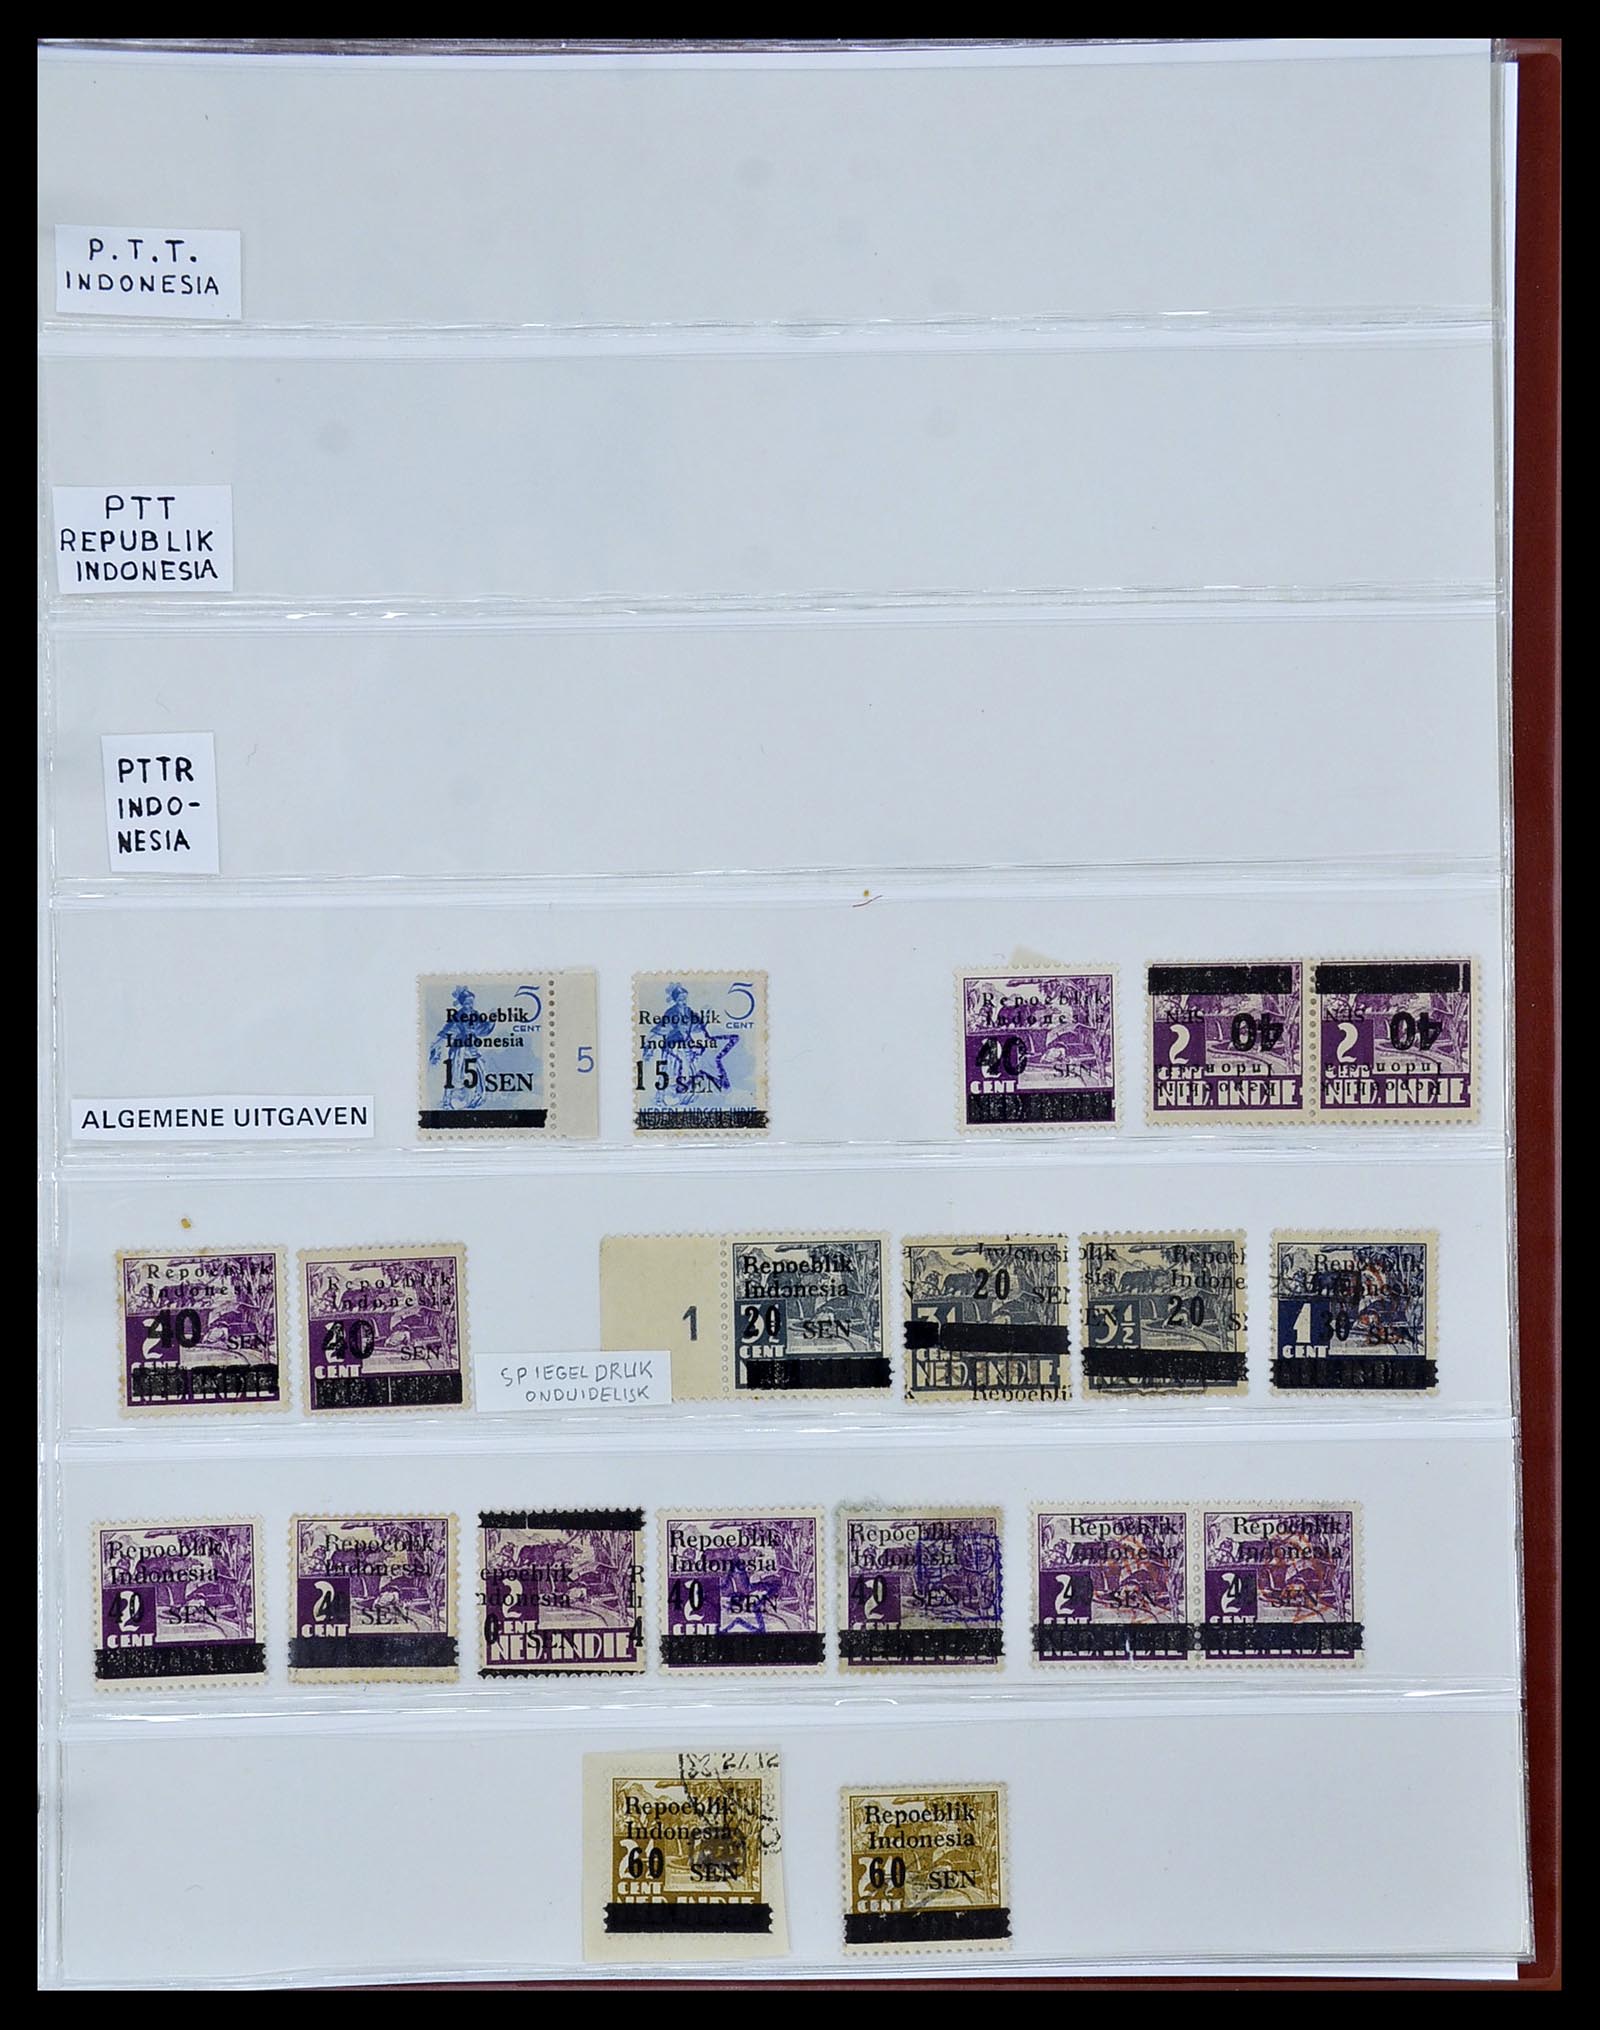 34545 079 - Stamp Collection 34545 Japanese Occupation of the Dutch East Indies and 